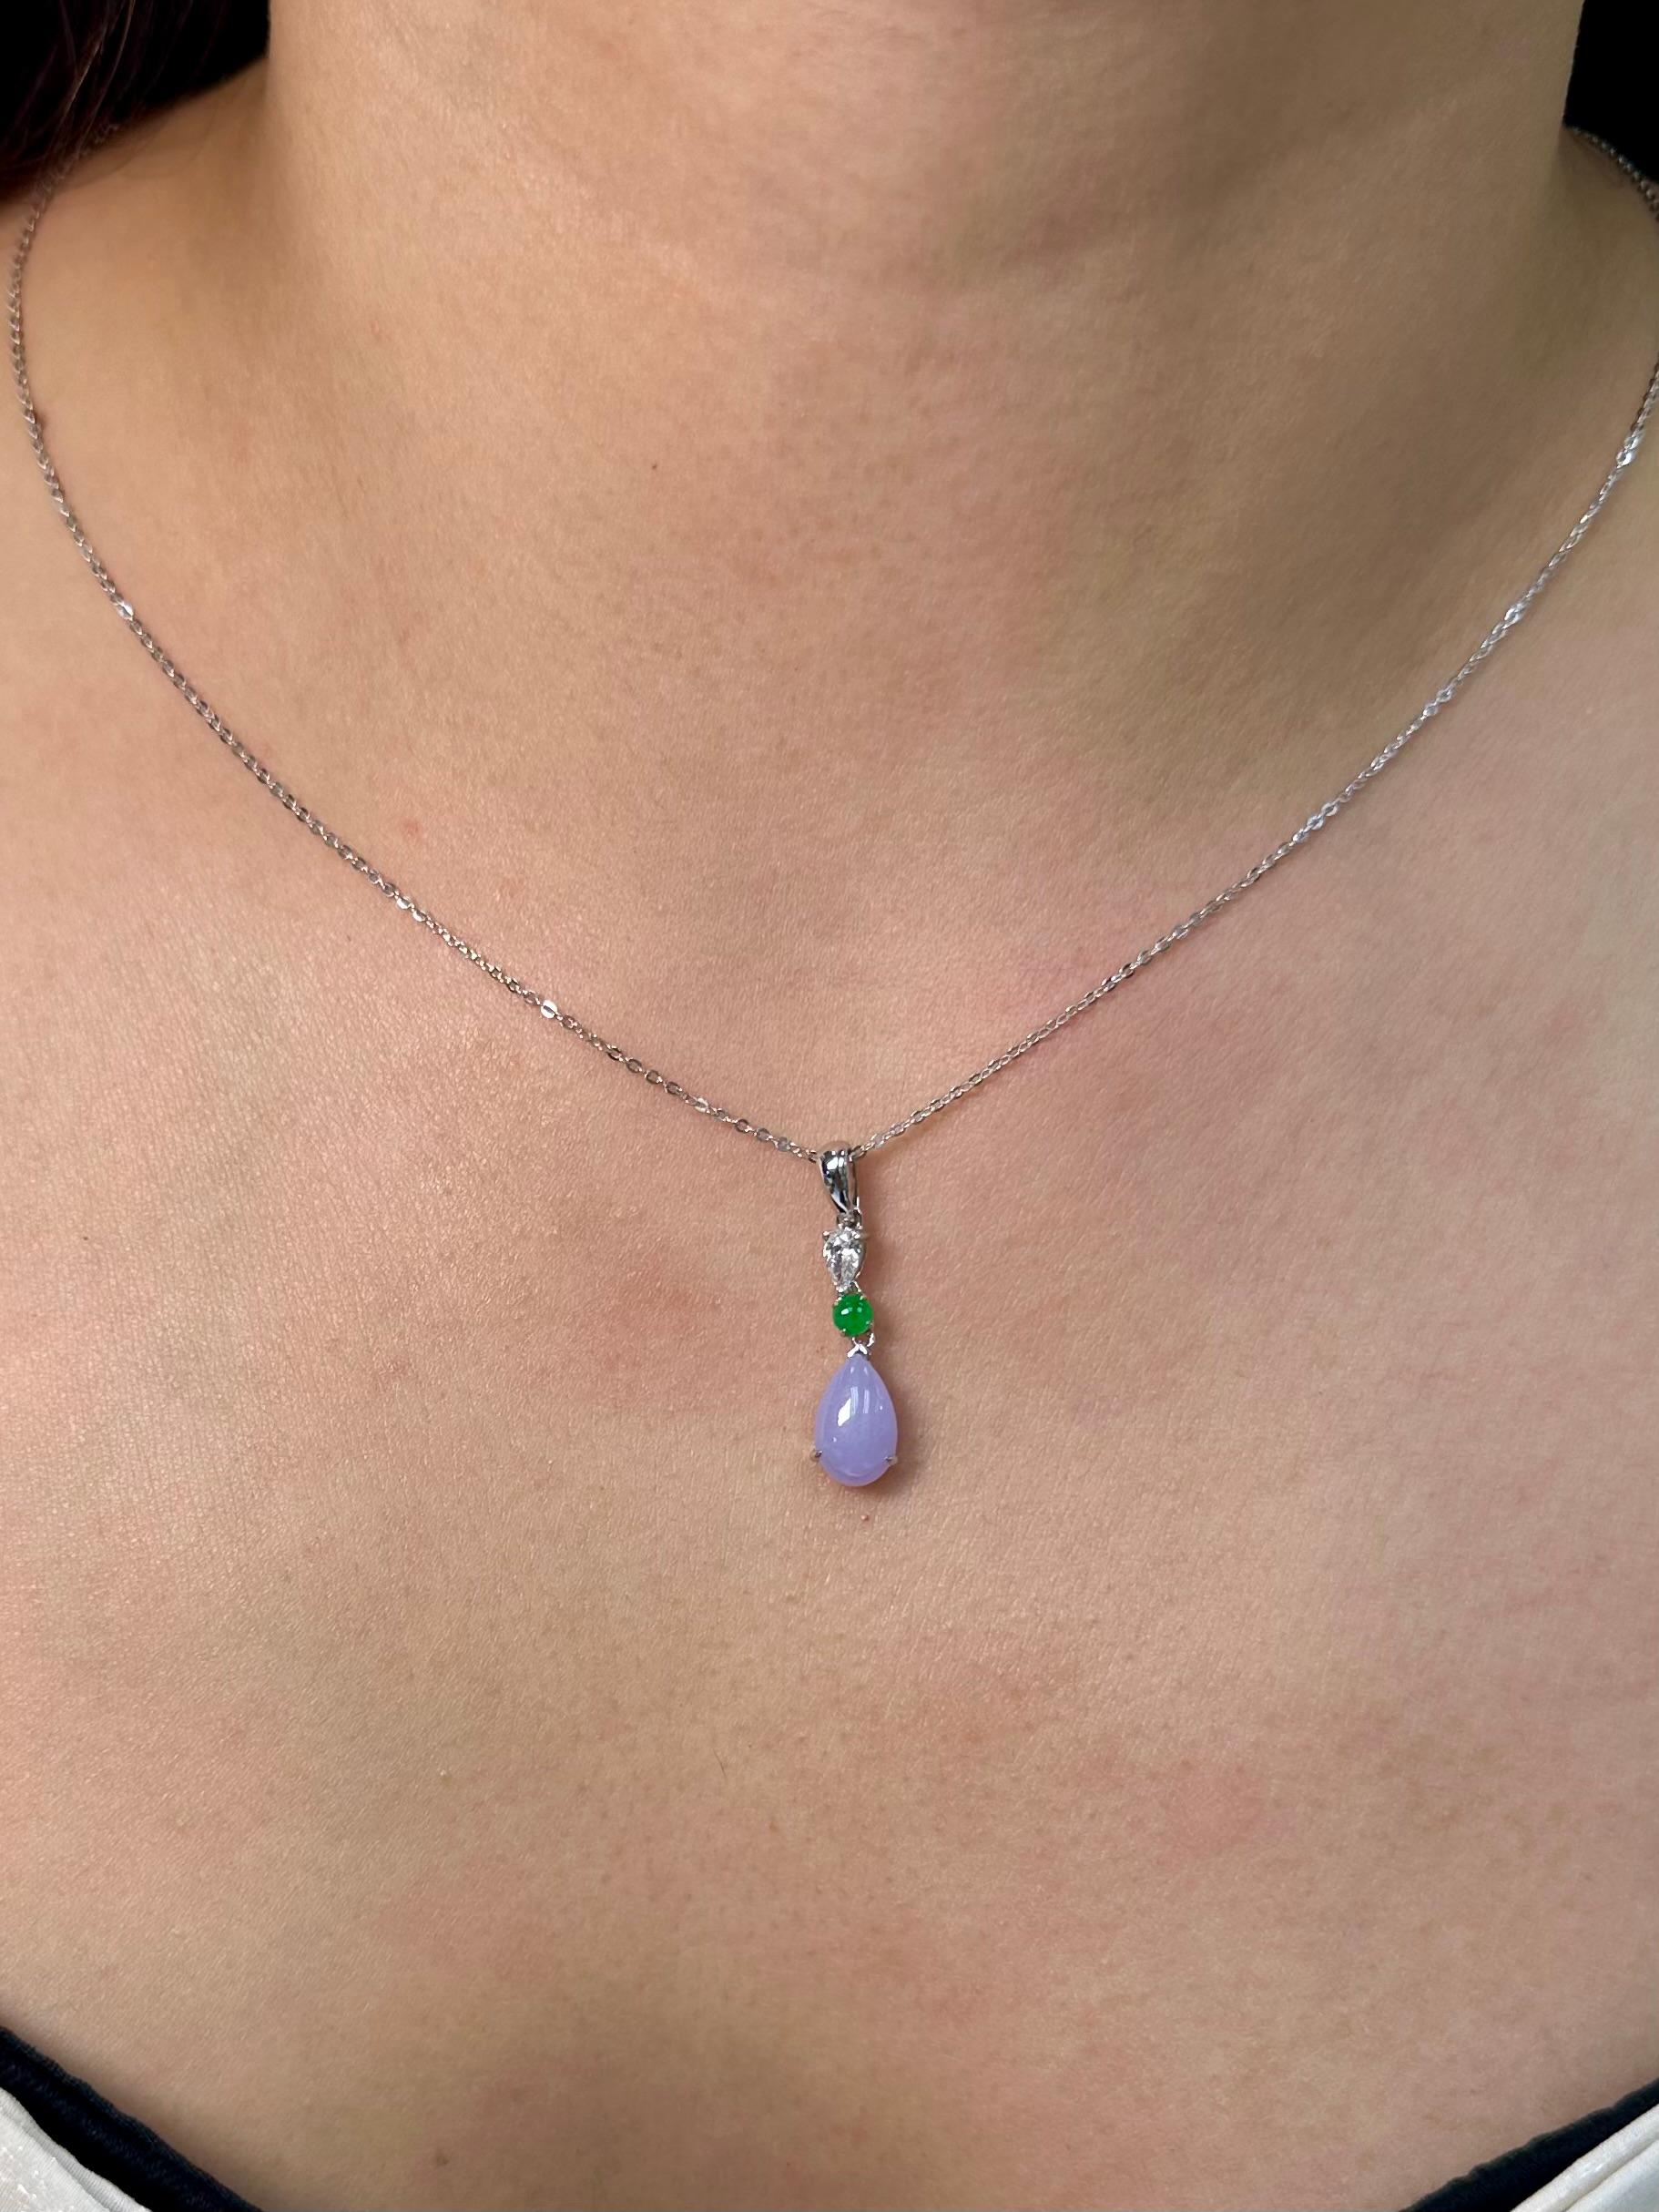 Please check out the HD video! The Jade is certified to be natural. The pendant is set in 18k white gold with one pear cut diamond. The diamond weights 0.15 cts. The untreated / un-enhanced natural lavender jade is translucent. The color is a